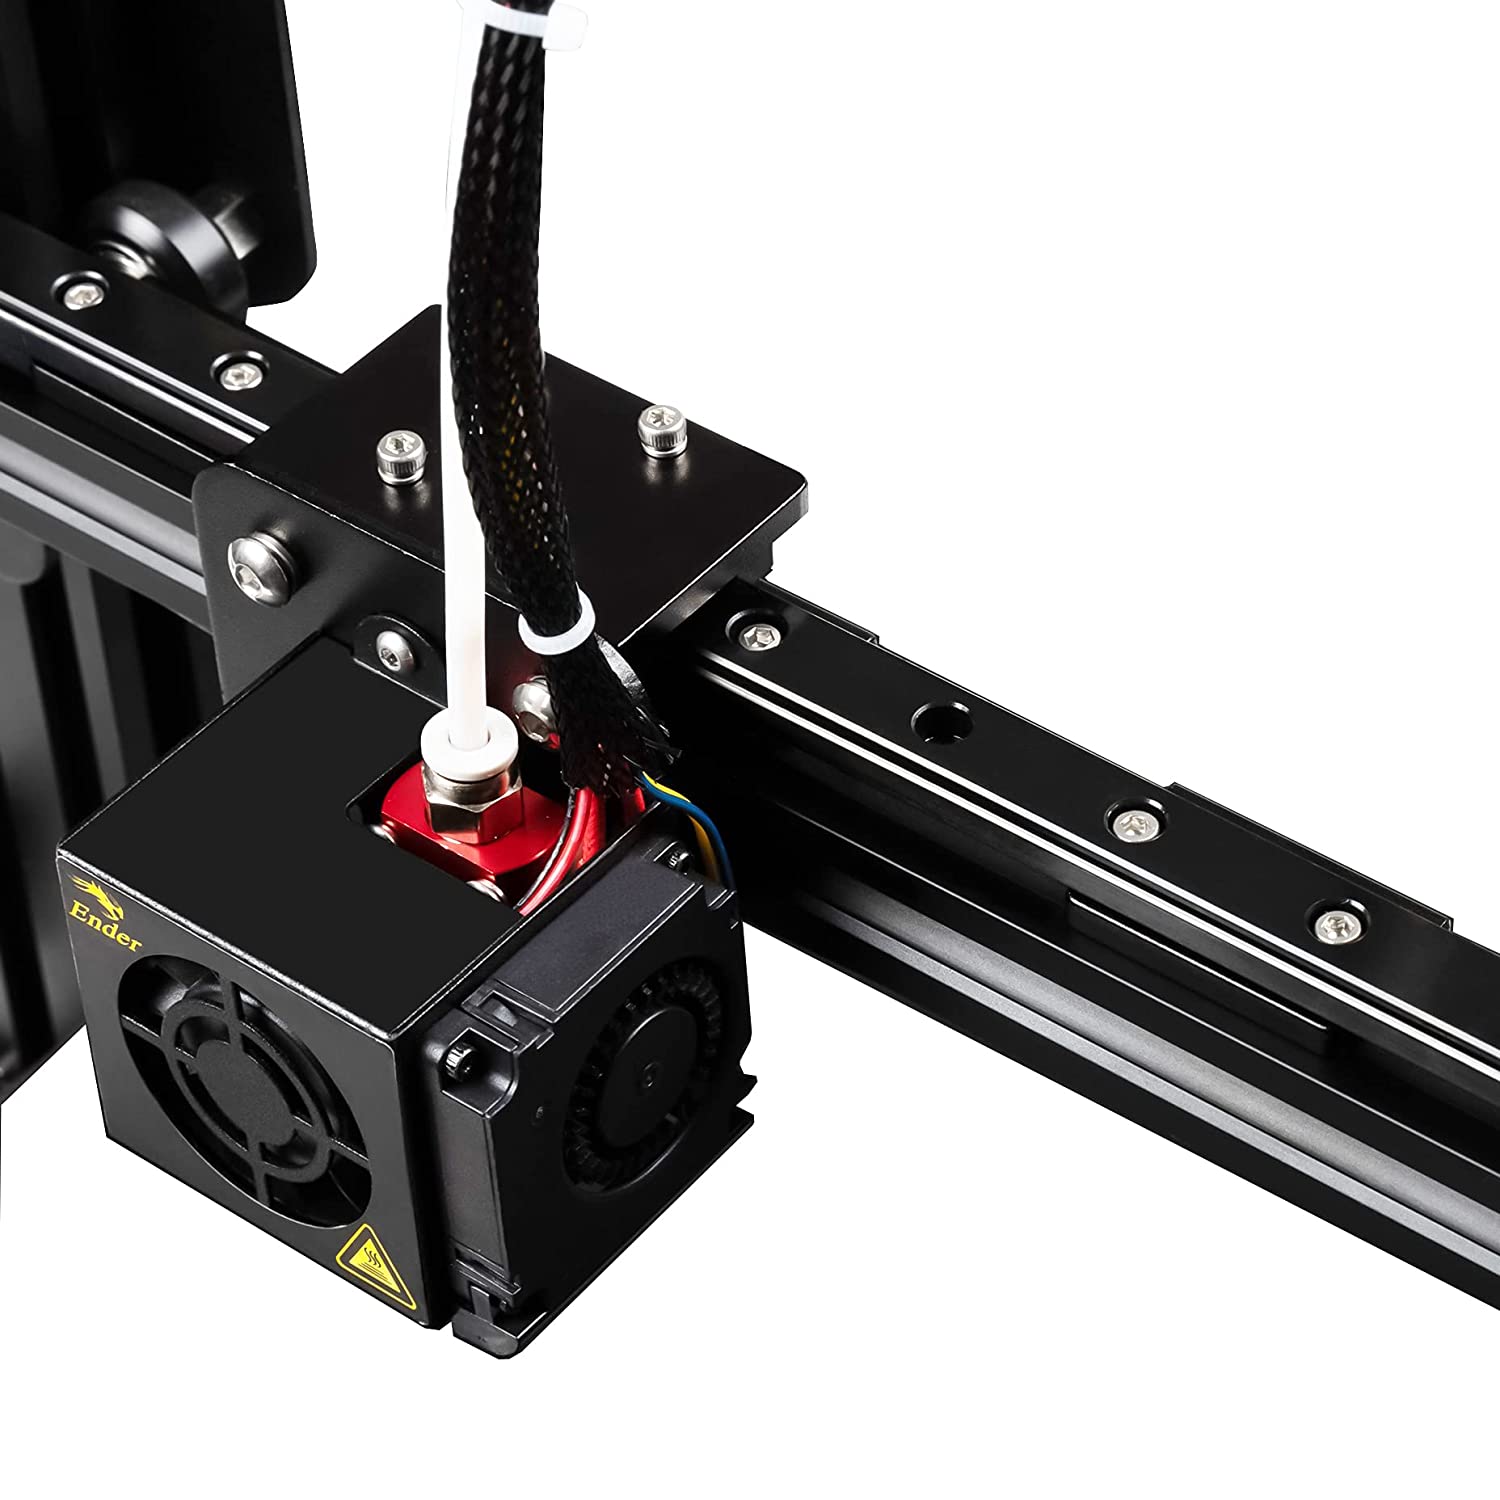 Creality 3D® Linear Rail X-Axis Hotend Mounting Bracket Upgrade Kit for MGN12H Linear Rails - Ender-3/Pro/V2